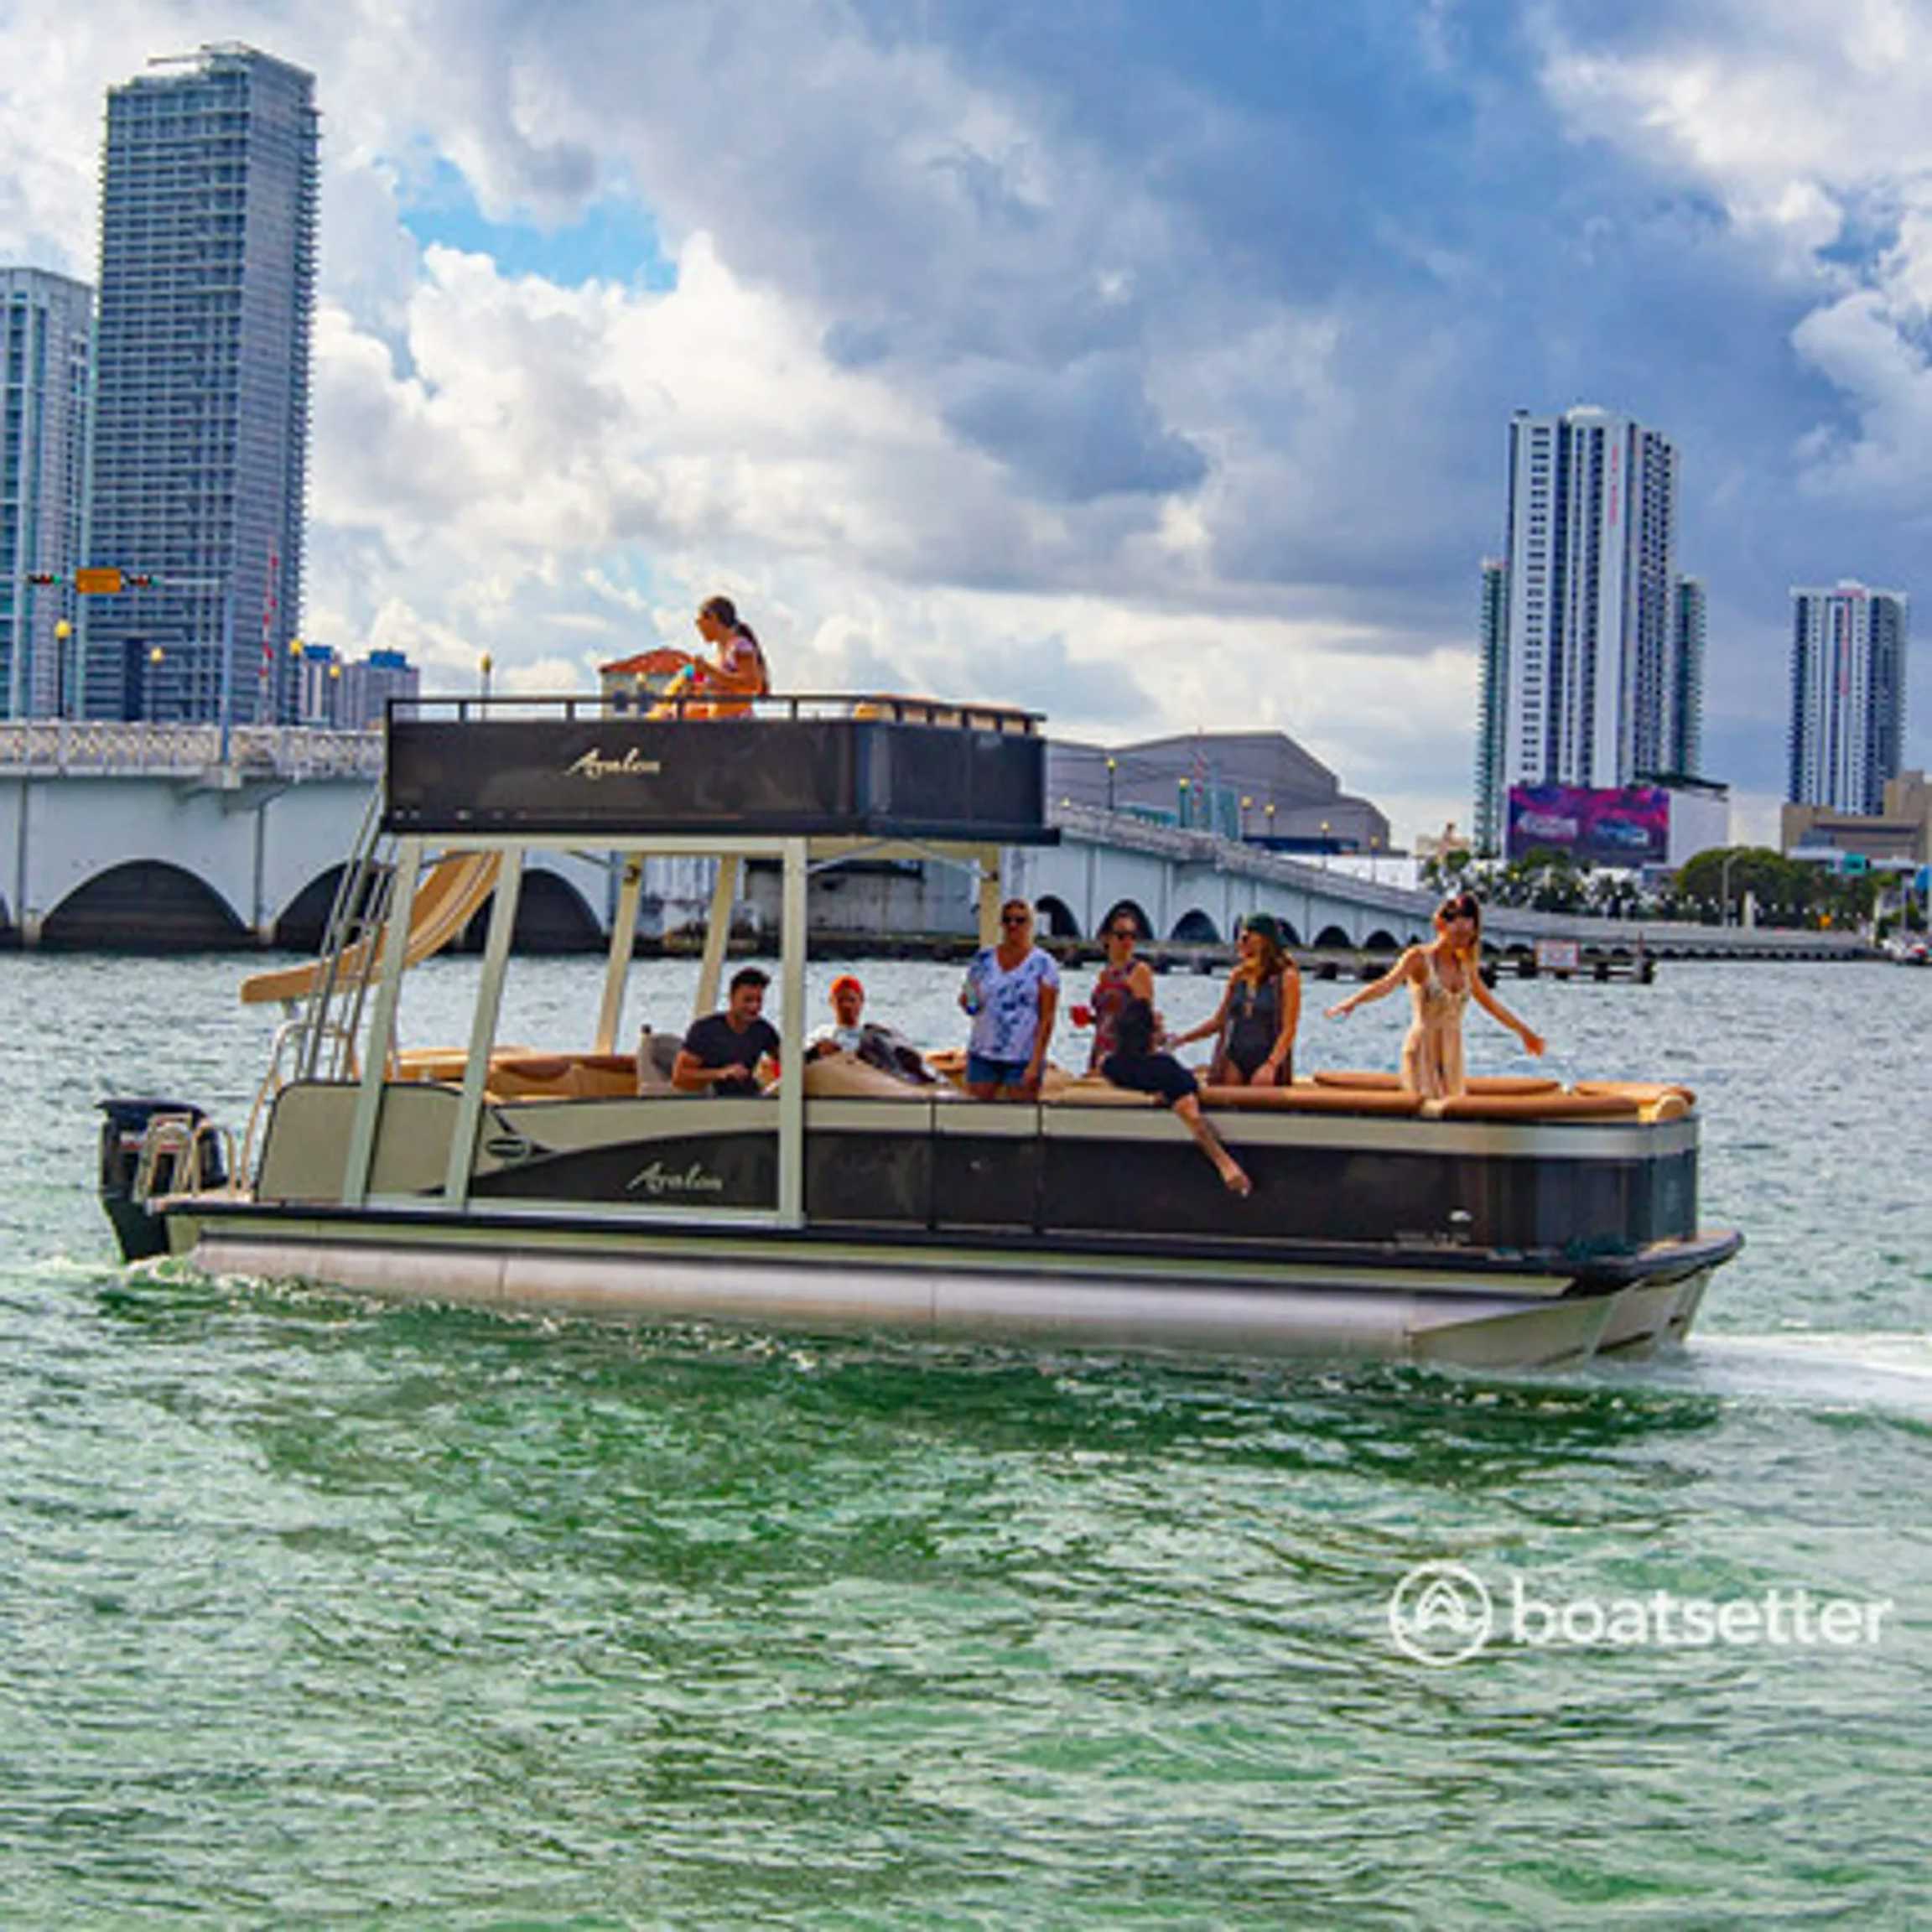 28'Avalon Pontoons for rent in Miami Beach, FL! - Private Space for Rent in  Miami - Swimply